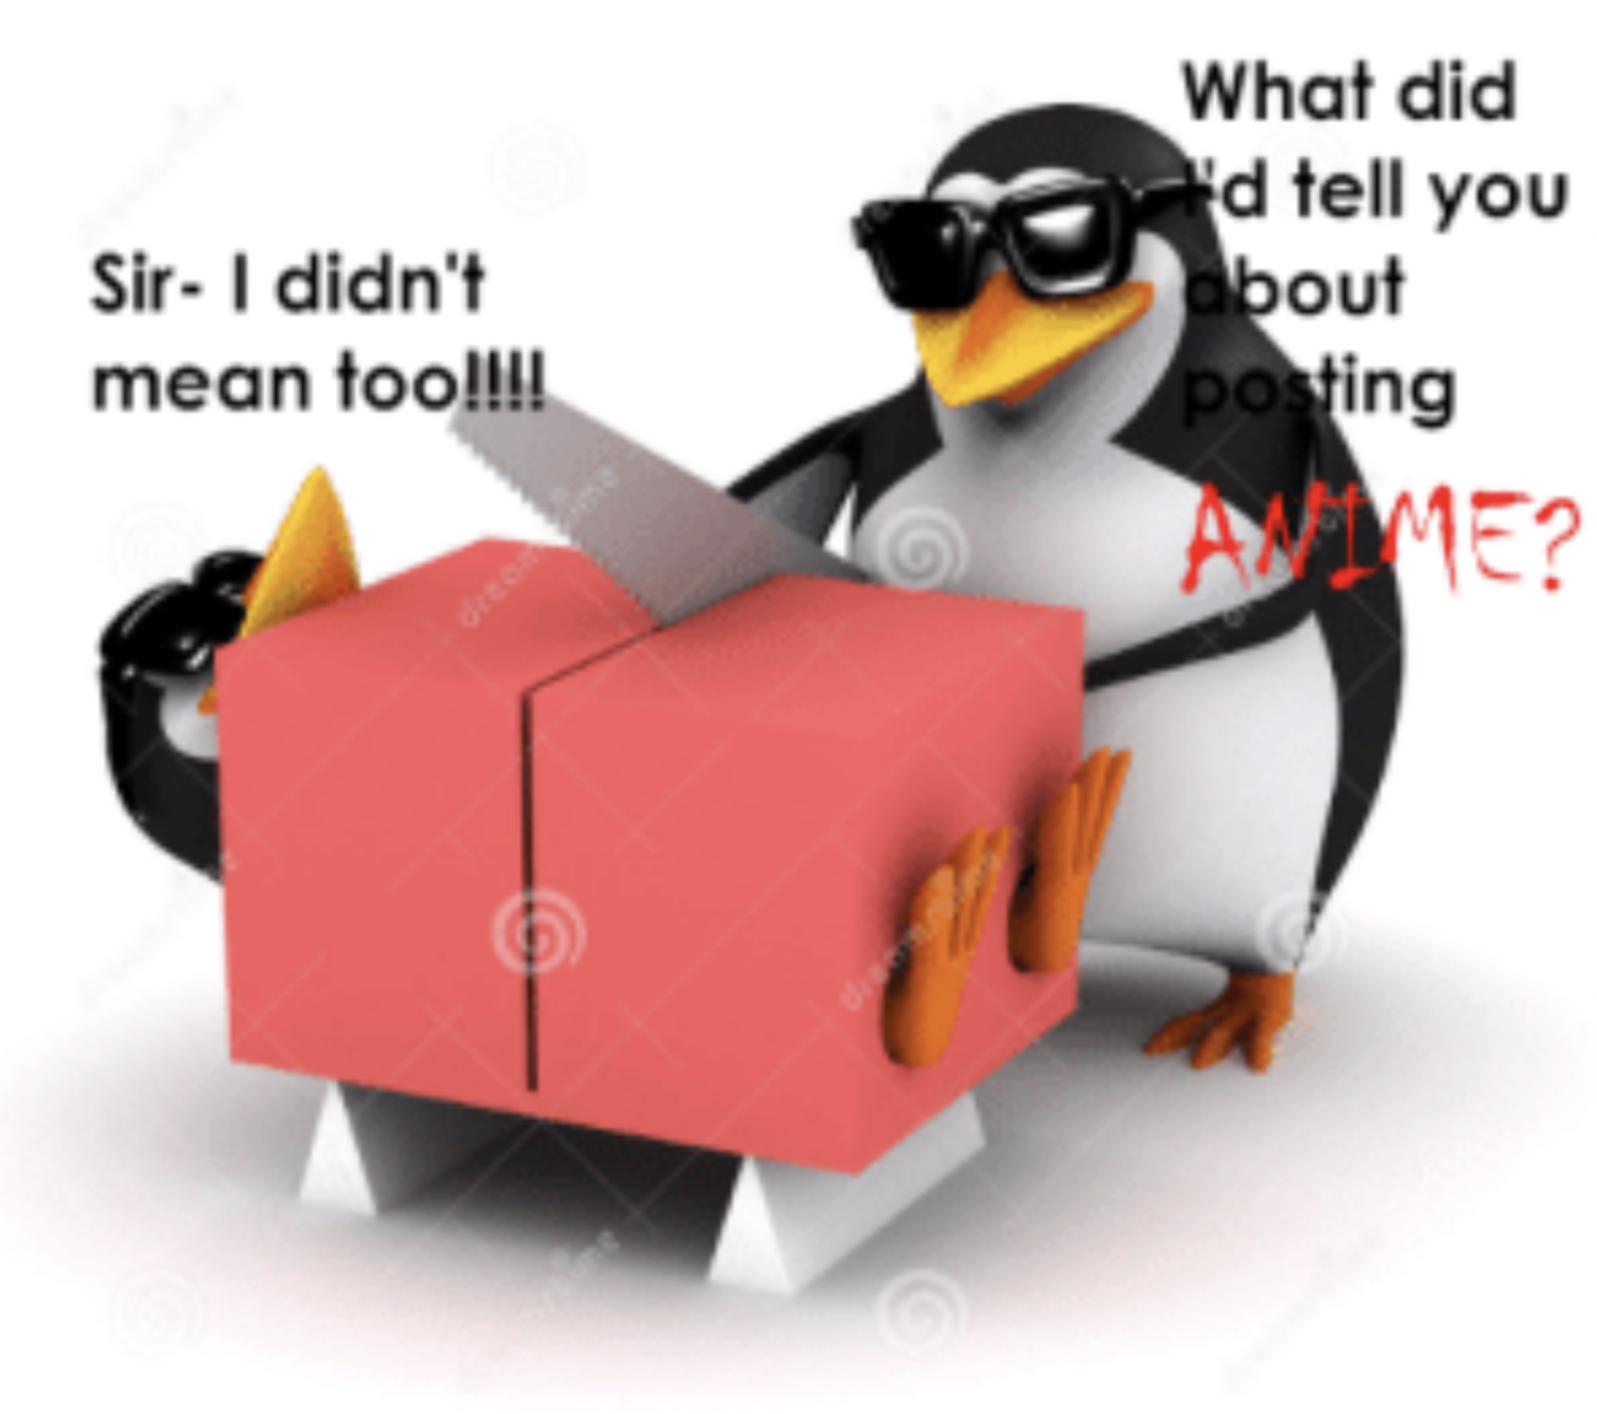 Private lays down the law | No Anime Penguin | Know Your Meme